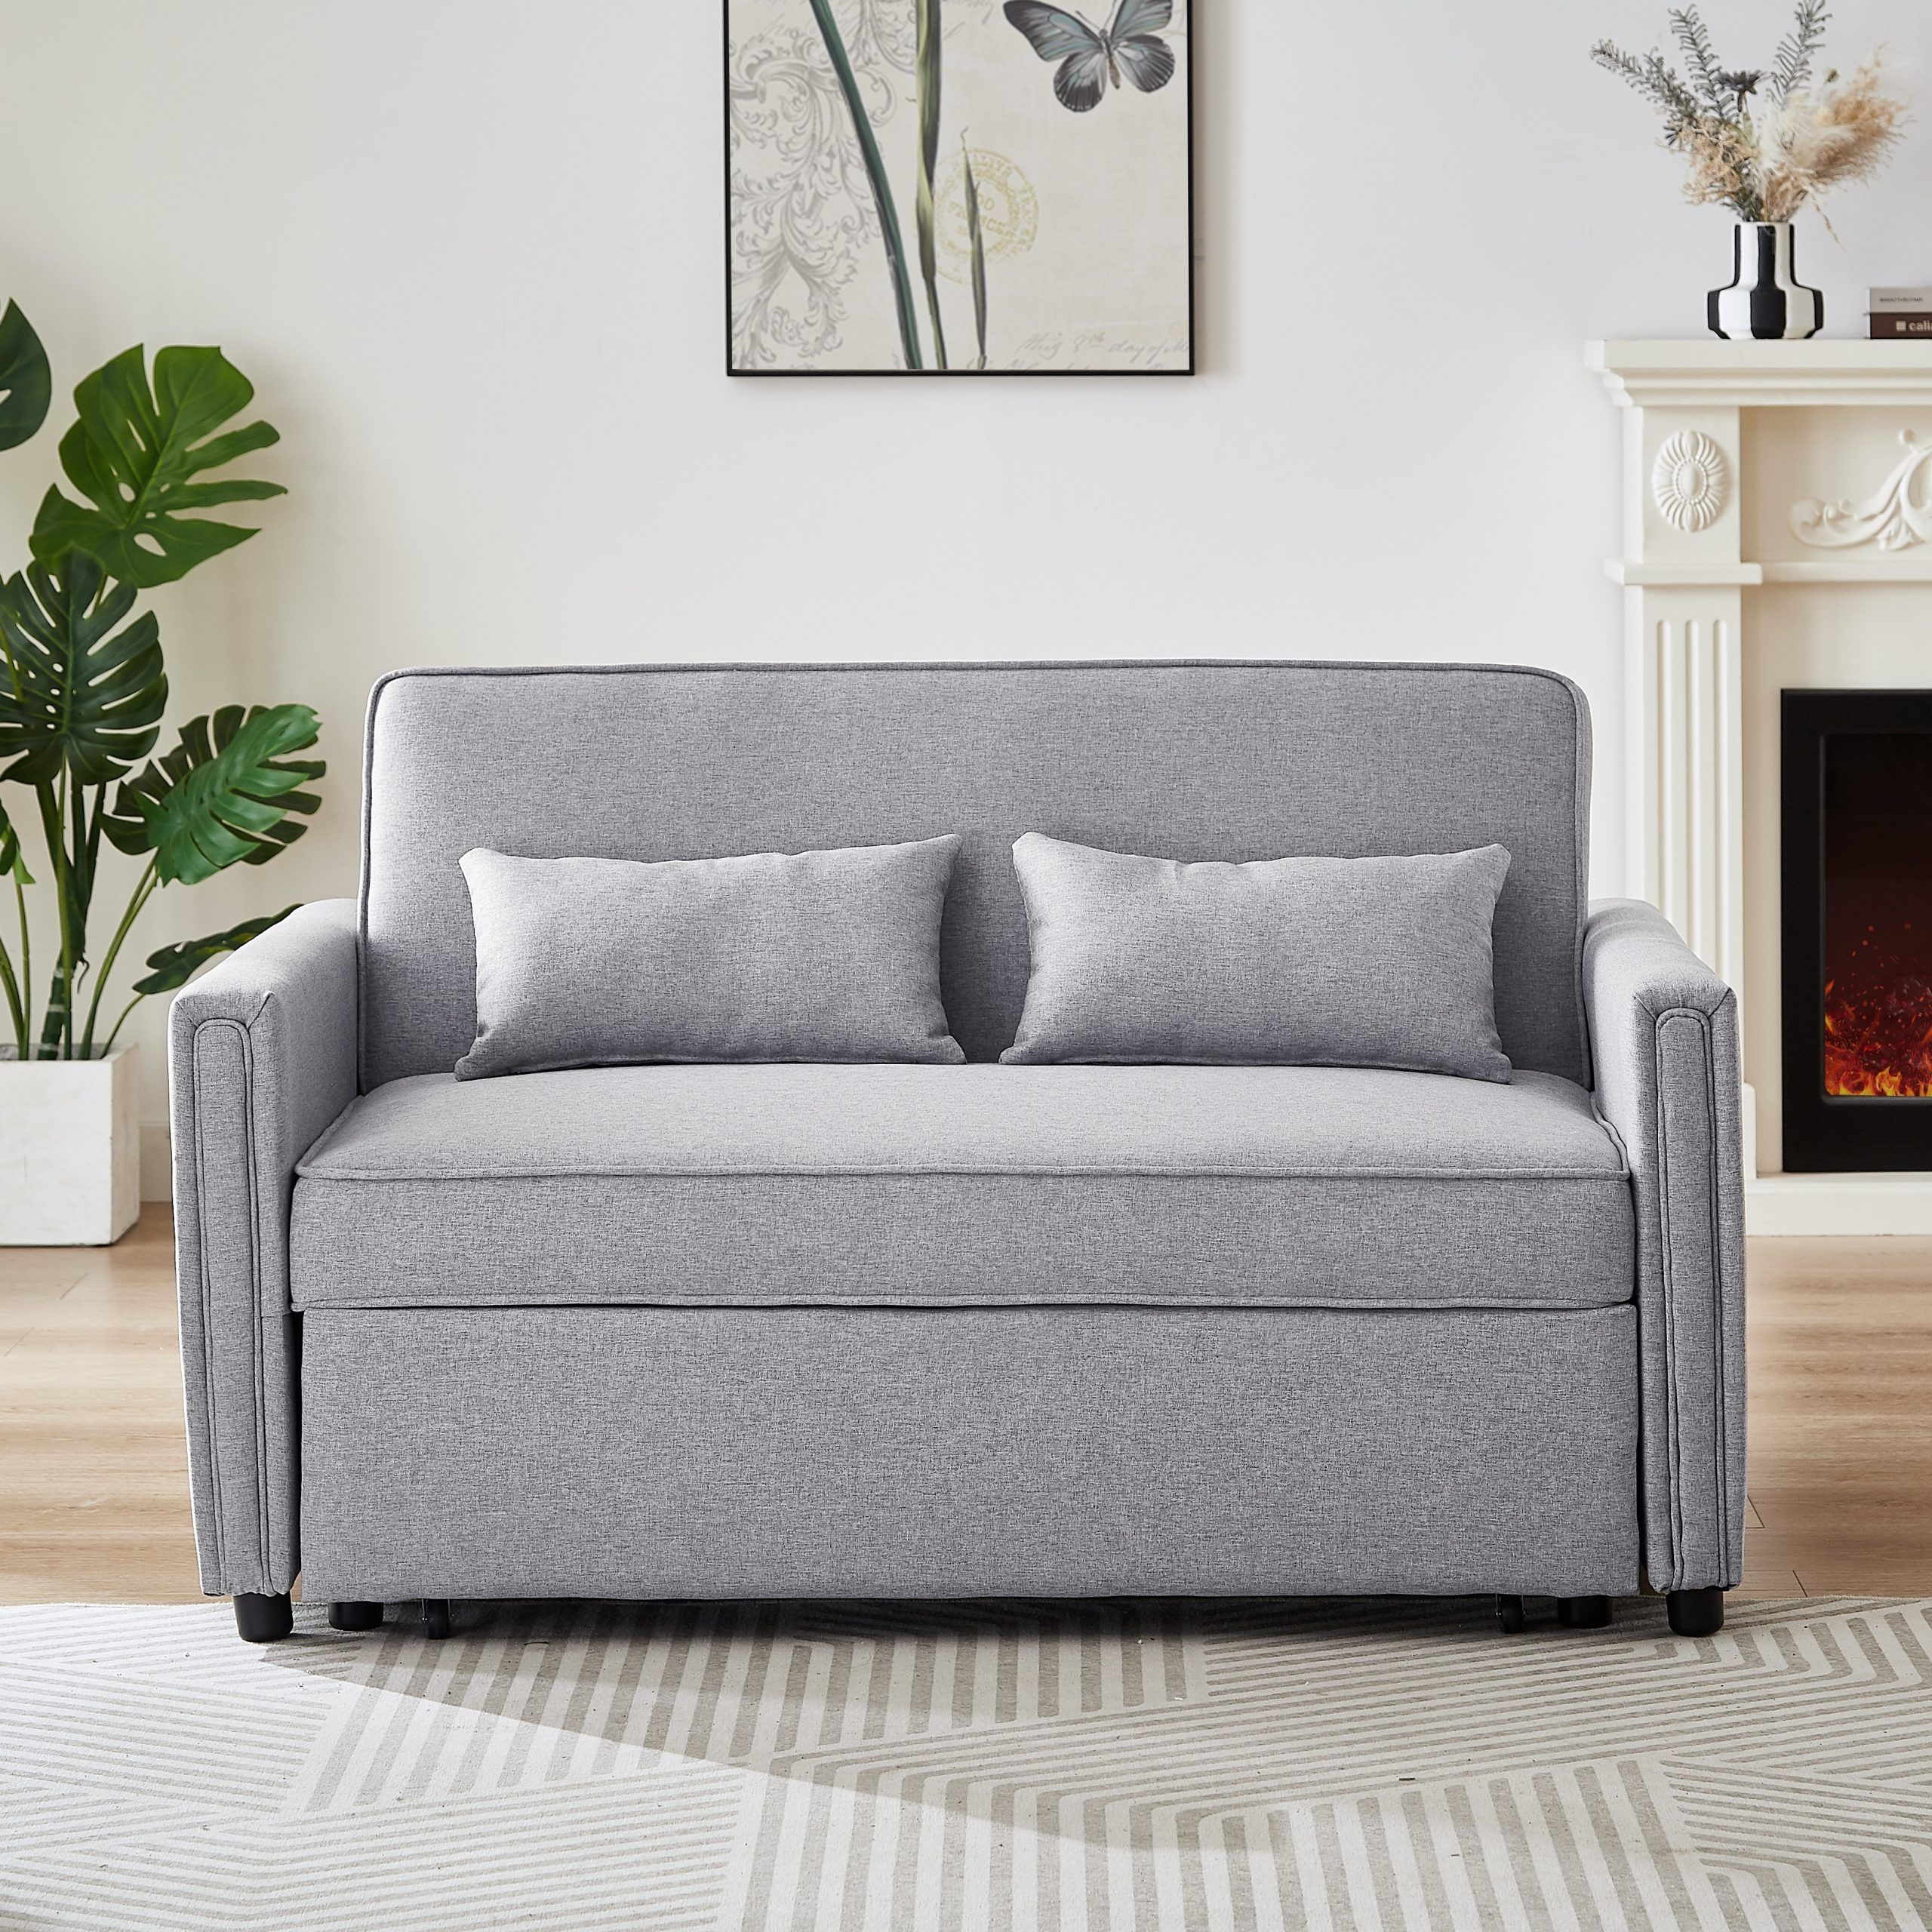 Linen Convertible Loveseat Sleeper Sofa Couch With Adjustable Backrest –  Bed Bath & Beyond – 38369360 Regarding Convertible Gray Loveseat Sleepers (Photo 14 of 15)